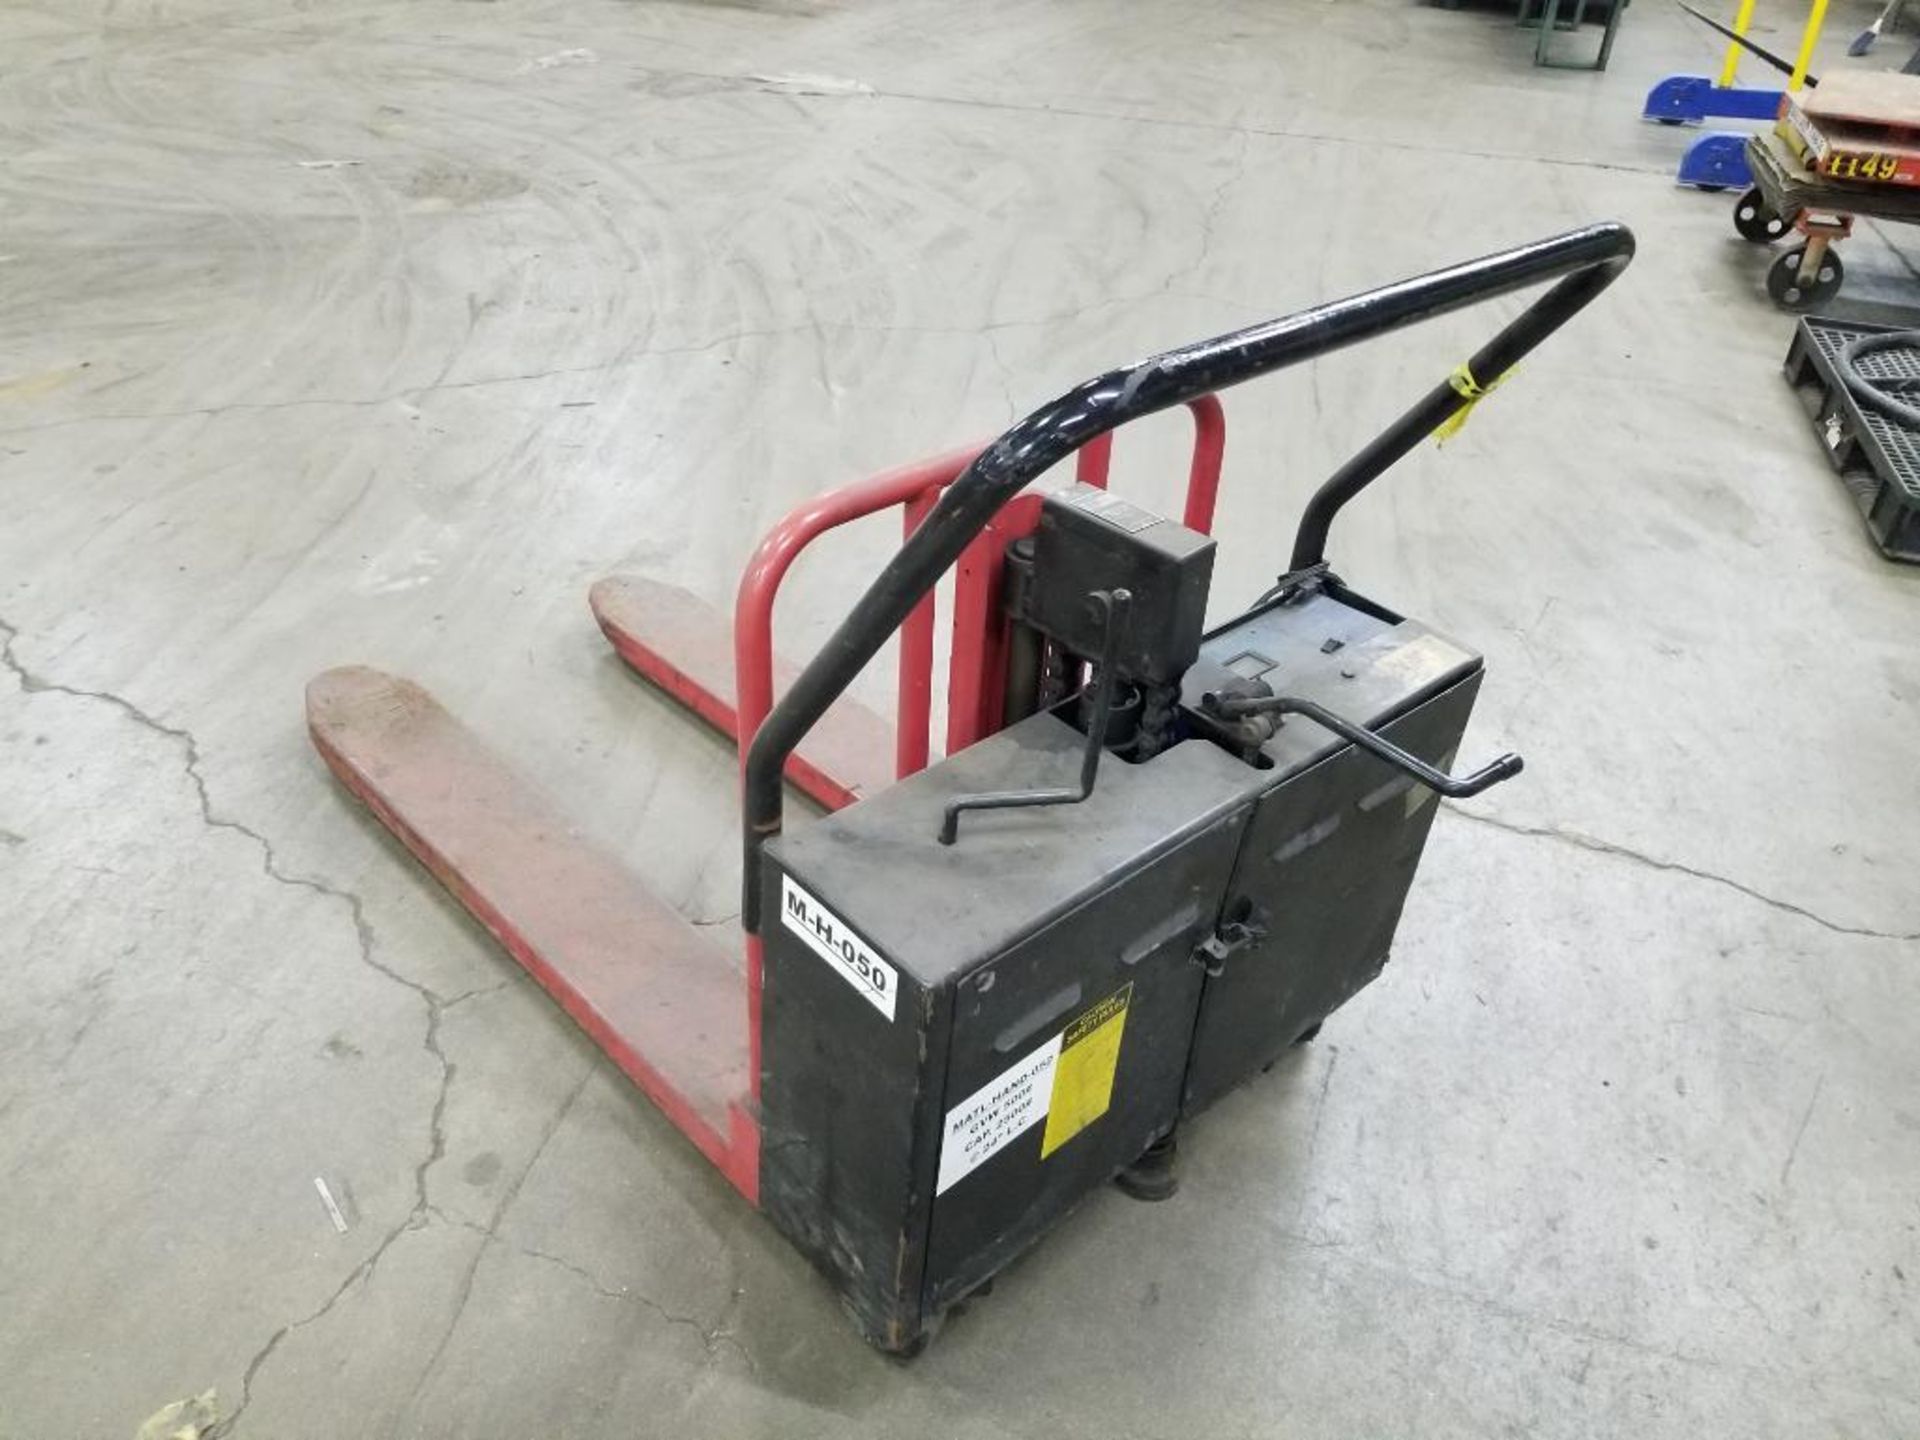 2500lb capacity battery operated power pallet jack. Built in charger. - Image 3 of 7